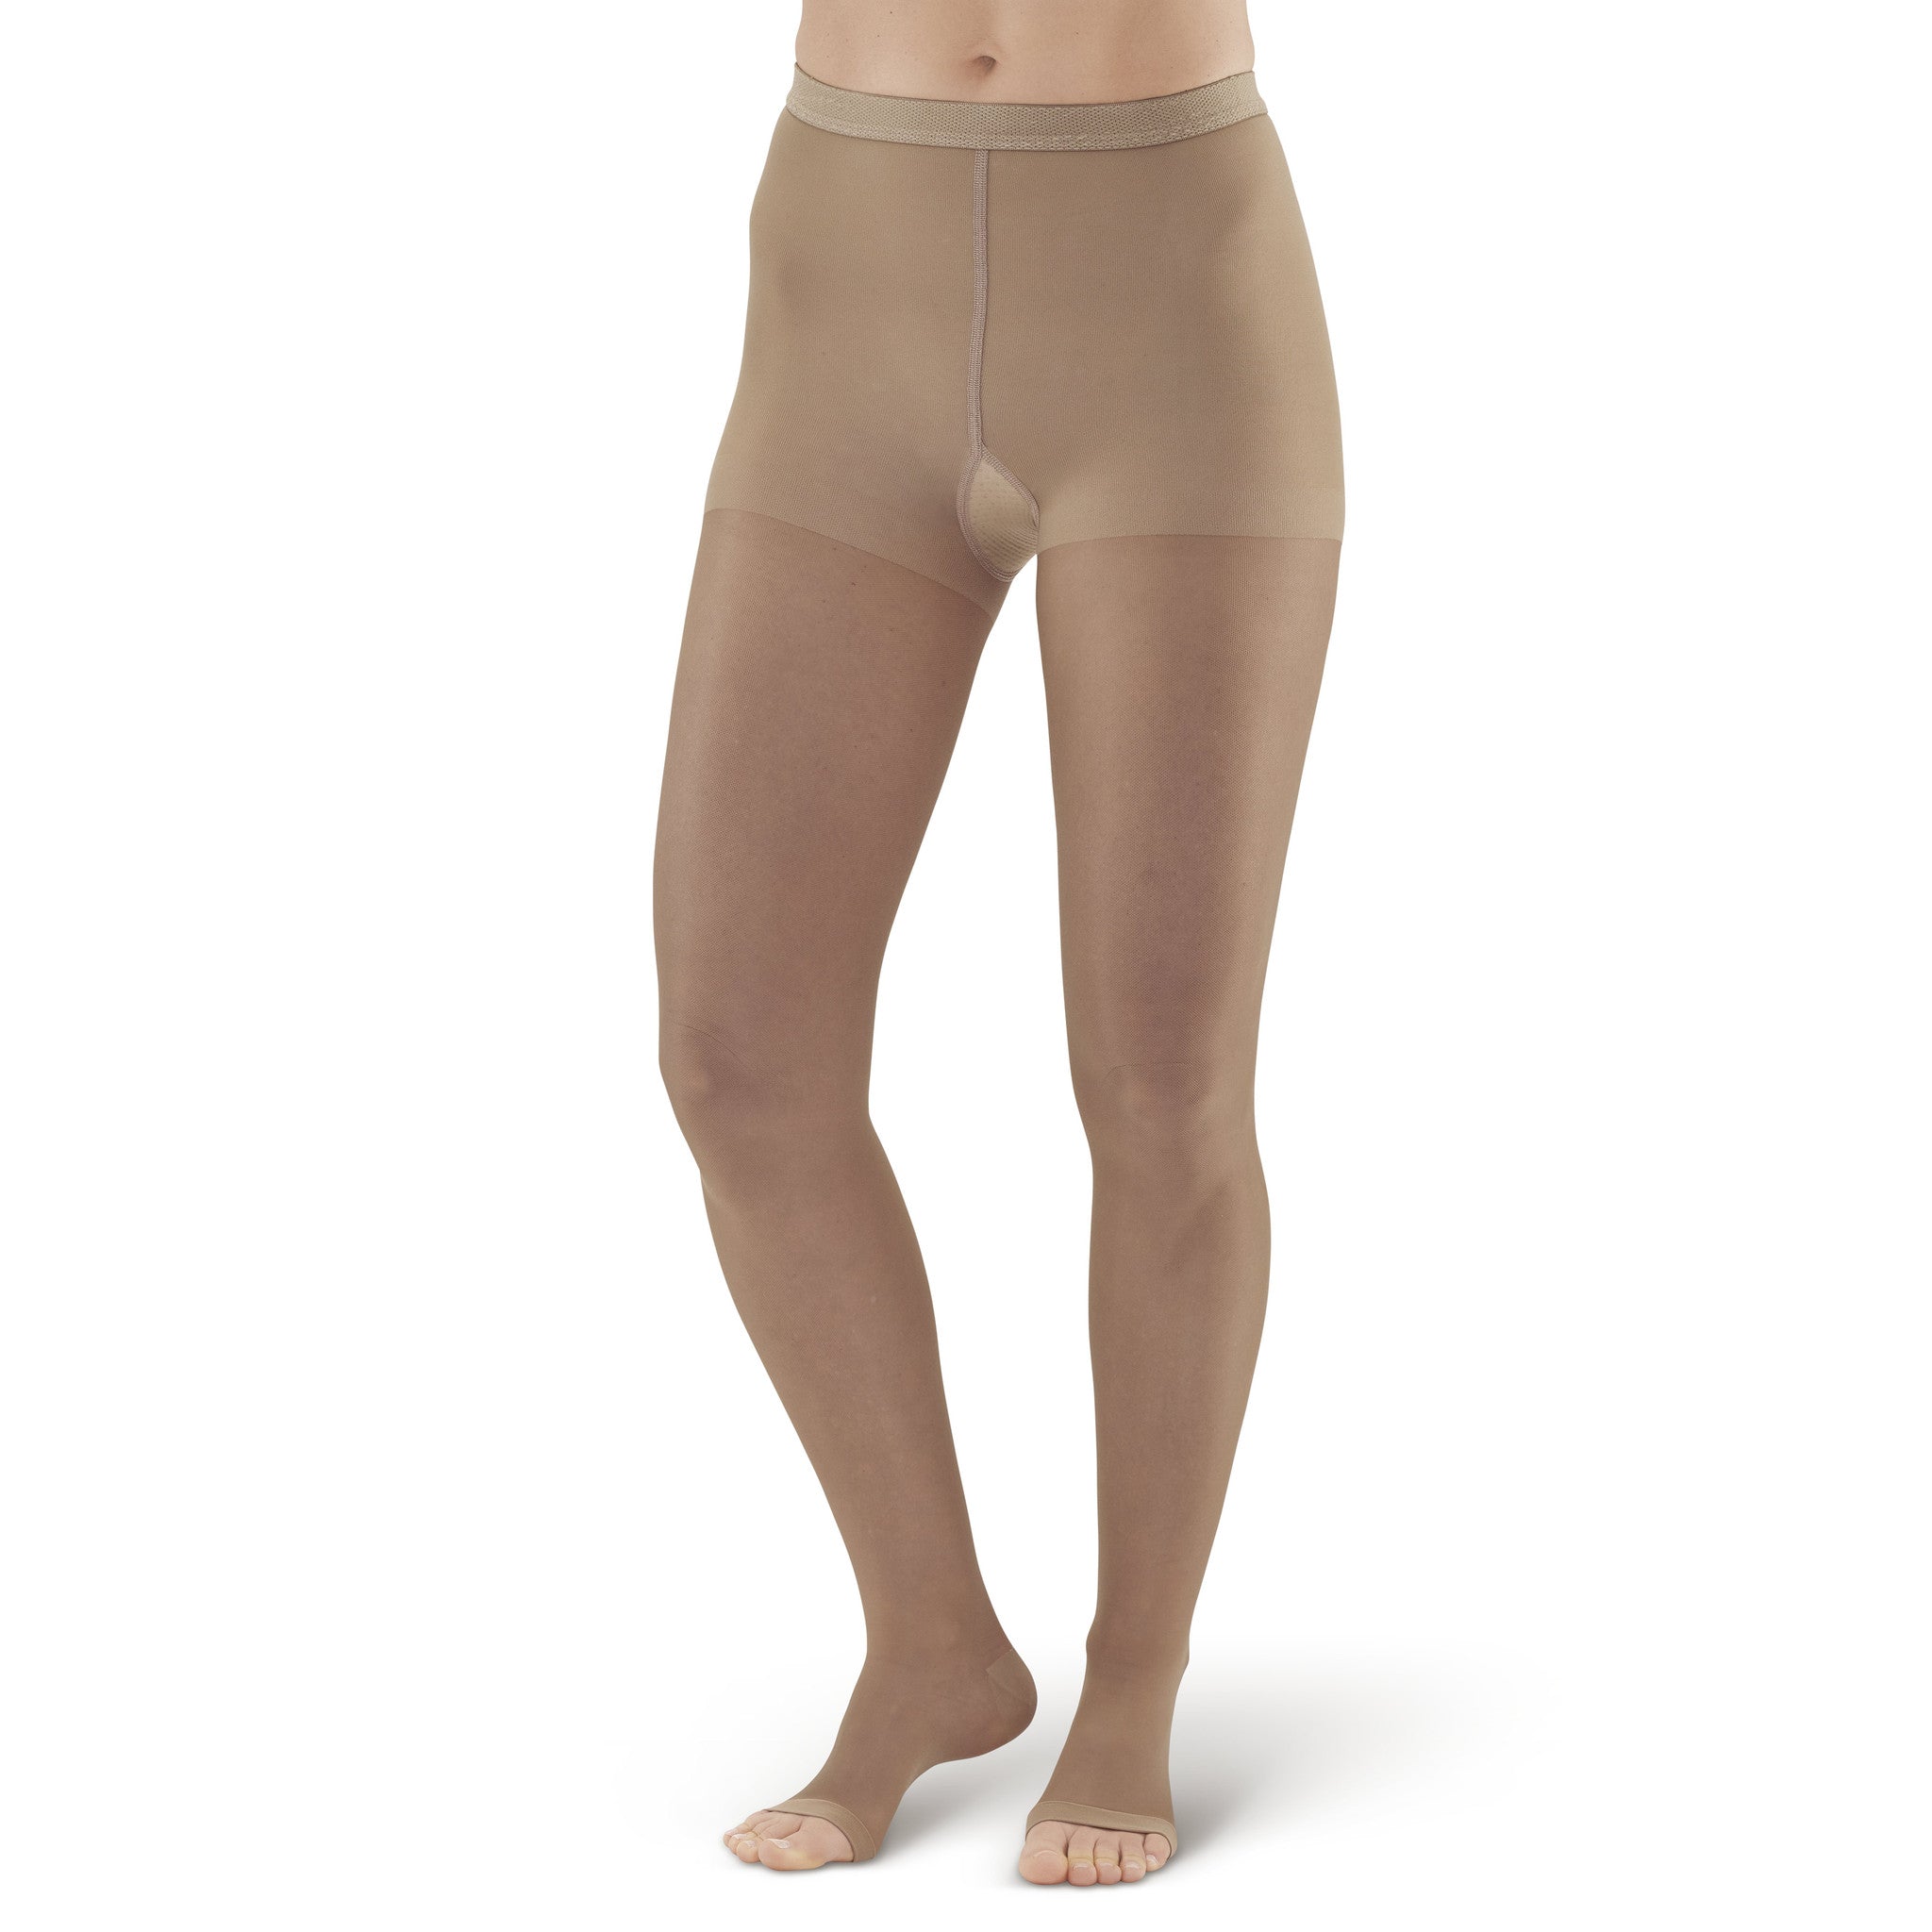 Sheer Compression Pantyhose l AW Style 15OT l Ames Walker Price Guarantee